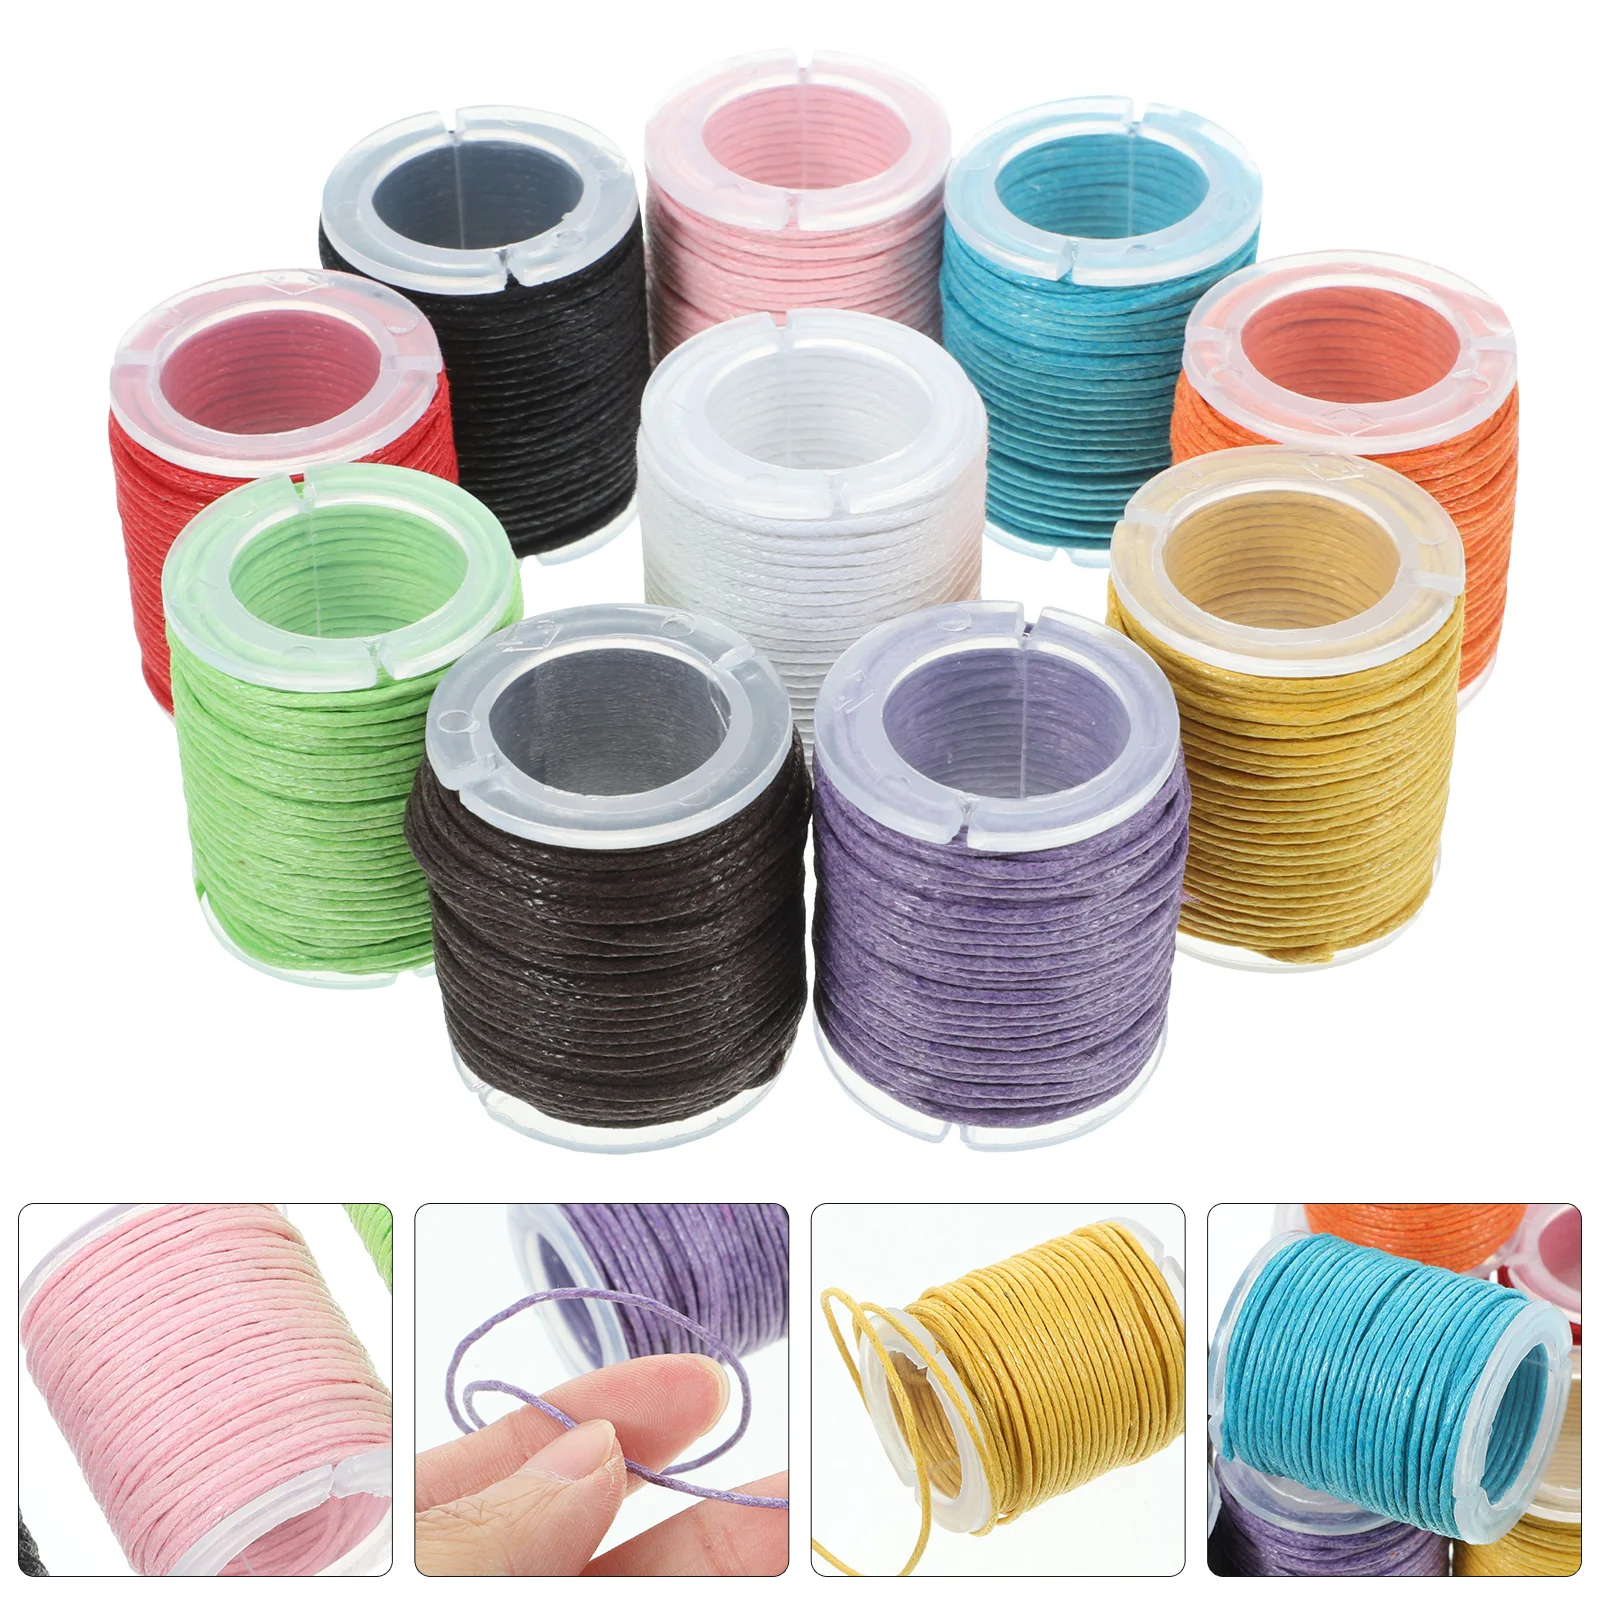 

10 Rolls Bracelet String 1Mm Waxed Cotton Cord DIY Wax Thread 10M Length Jewelry Craft Making 10 Colors